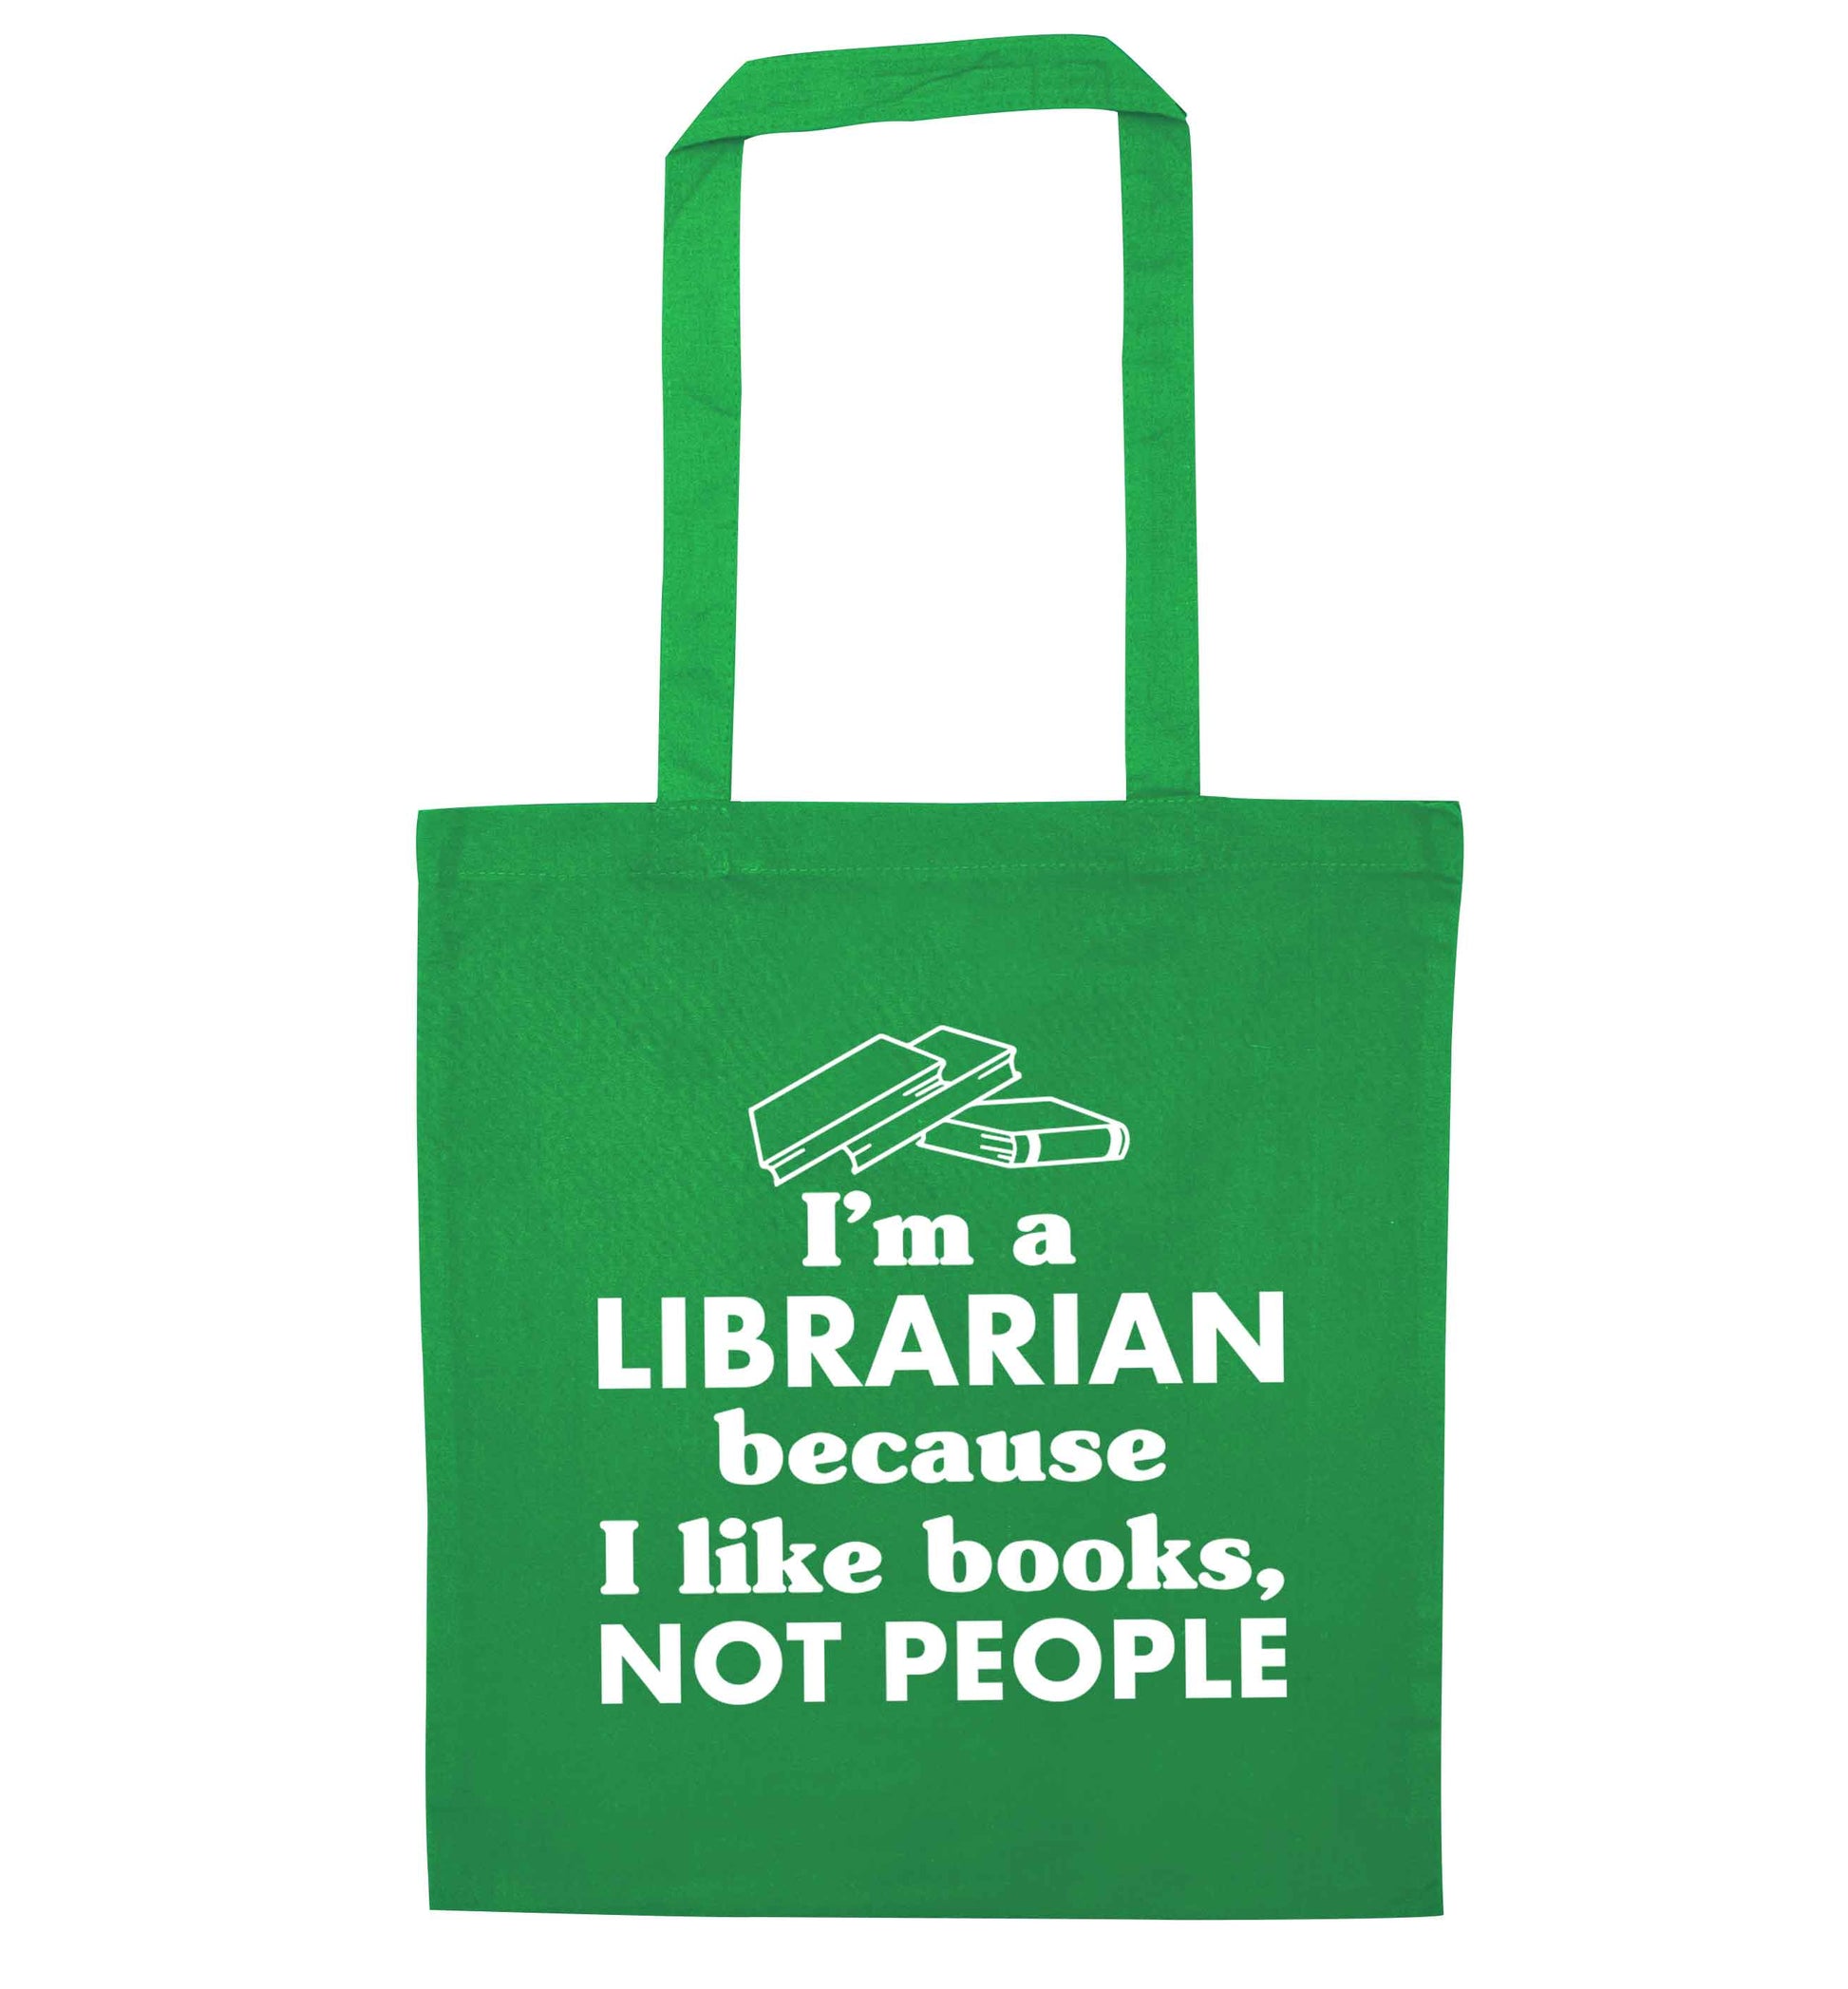 I'm a librarian because I like books not people green tote bag